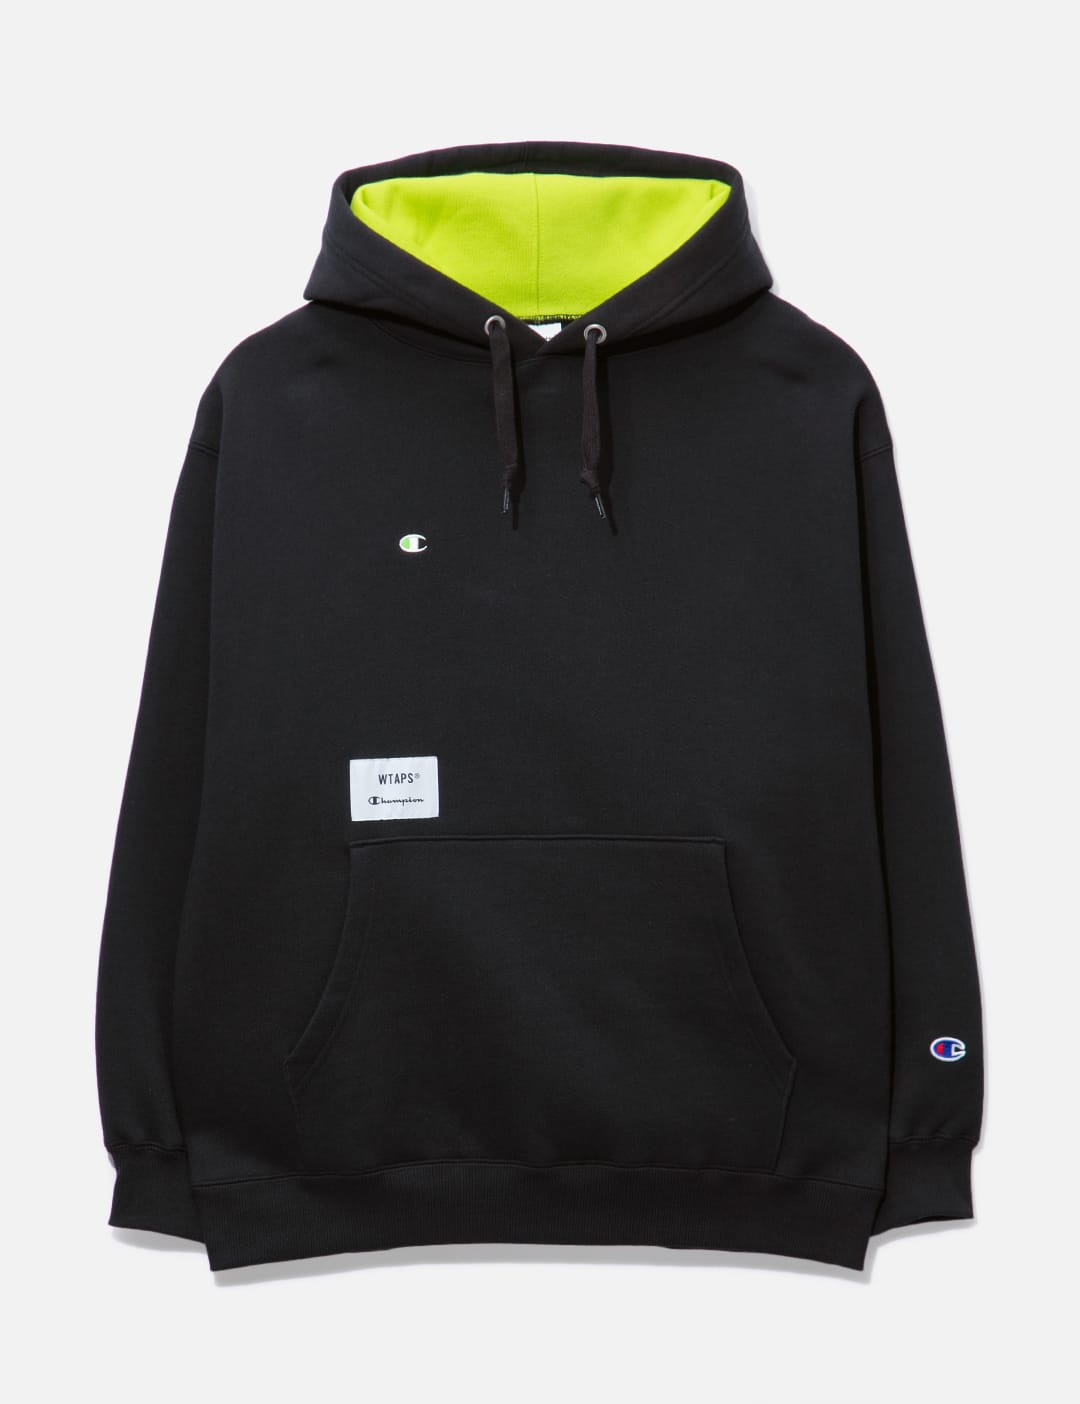 WTAPS - Wtaps Pocketed Jacket | HBX - Globally Curated Fashion and